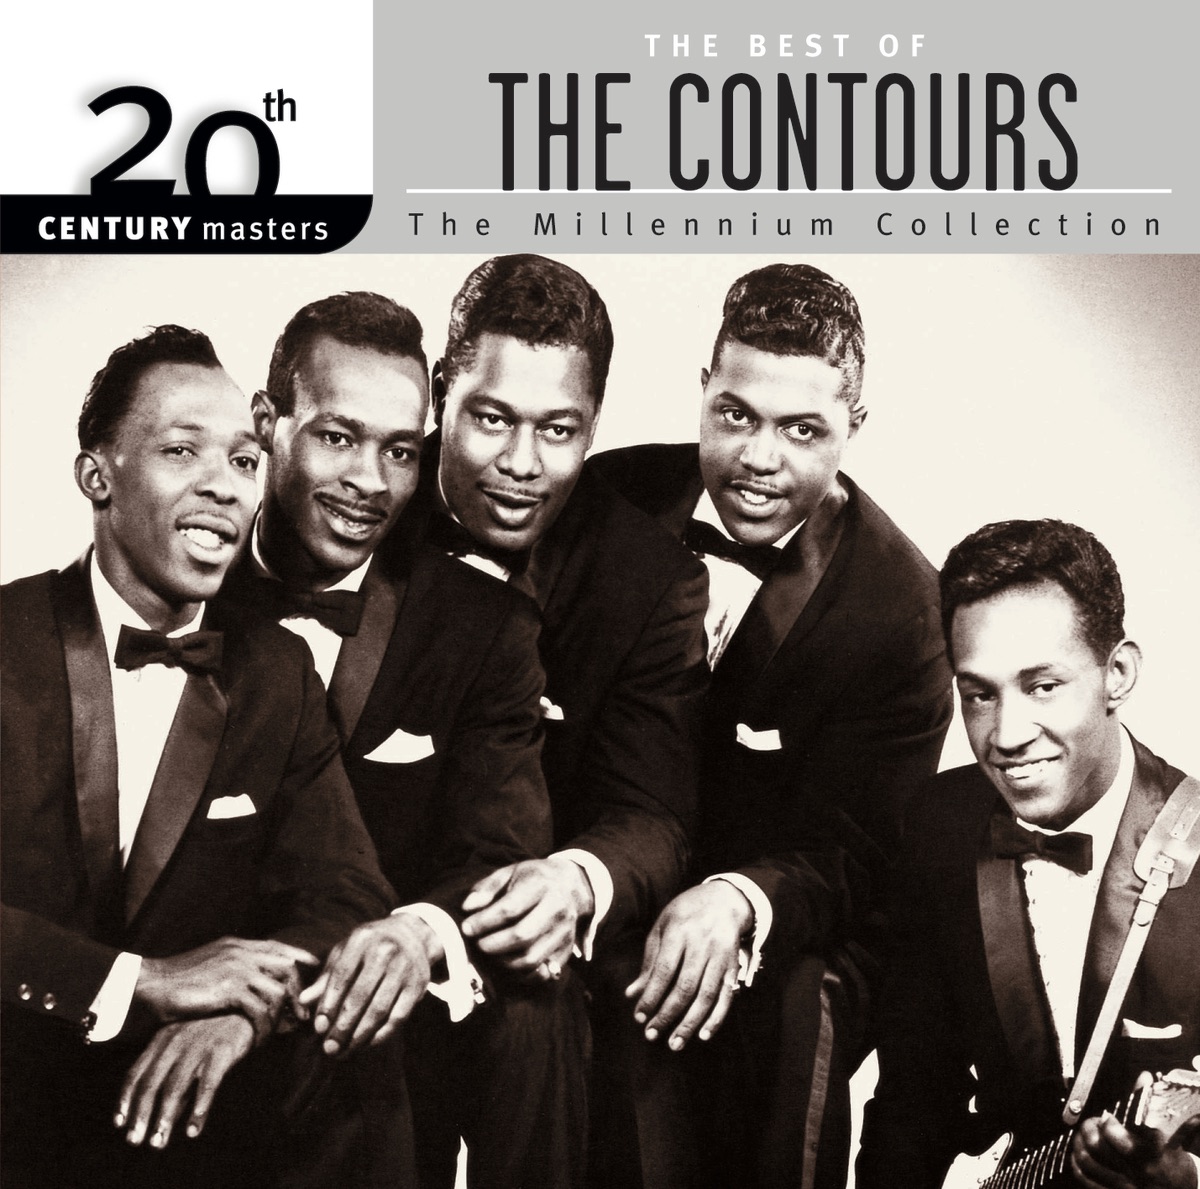 20th Century Masters The Millennium Collection Best Of The Contours Album Cover By The Contours